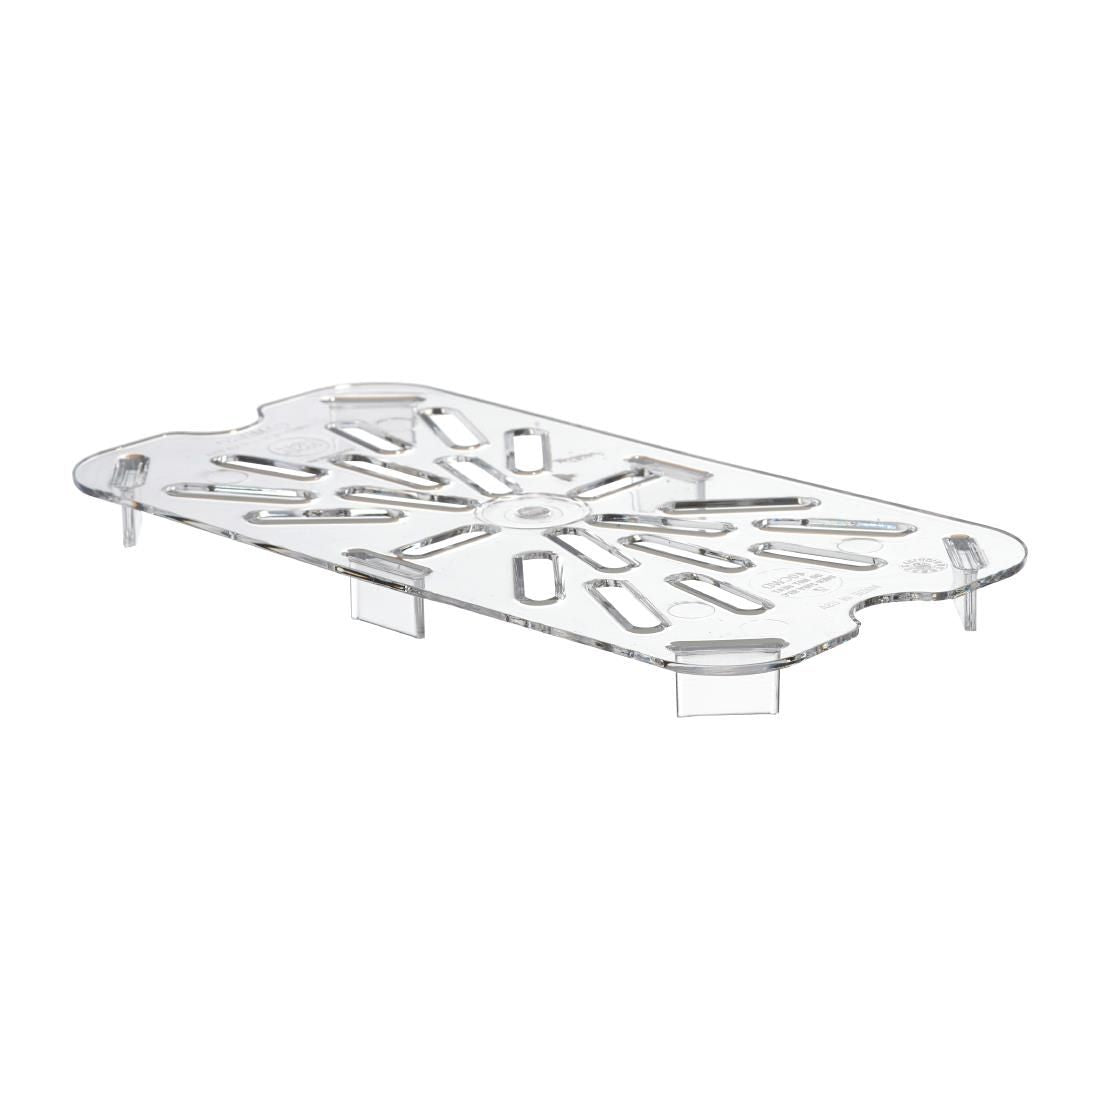 DM749 Cambro Polycarbonate 1/4 Gastronorm Pan Drain Shelf JD Catering Equipment Solutions Ltd